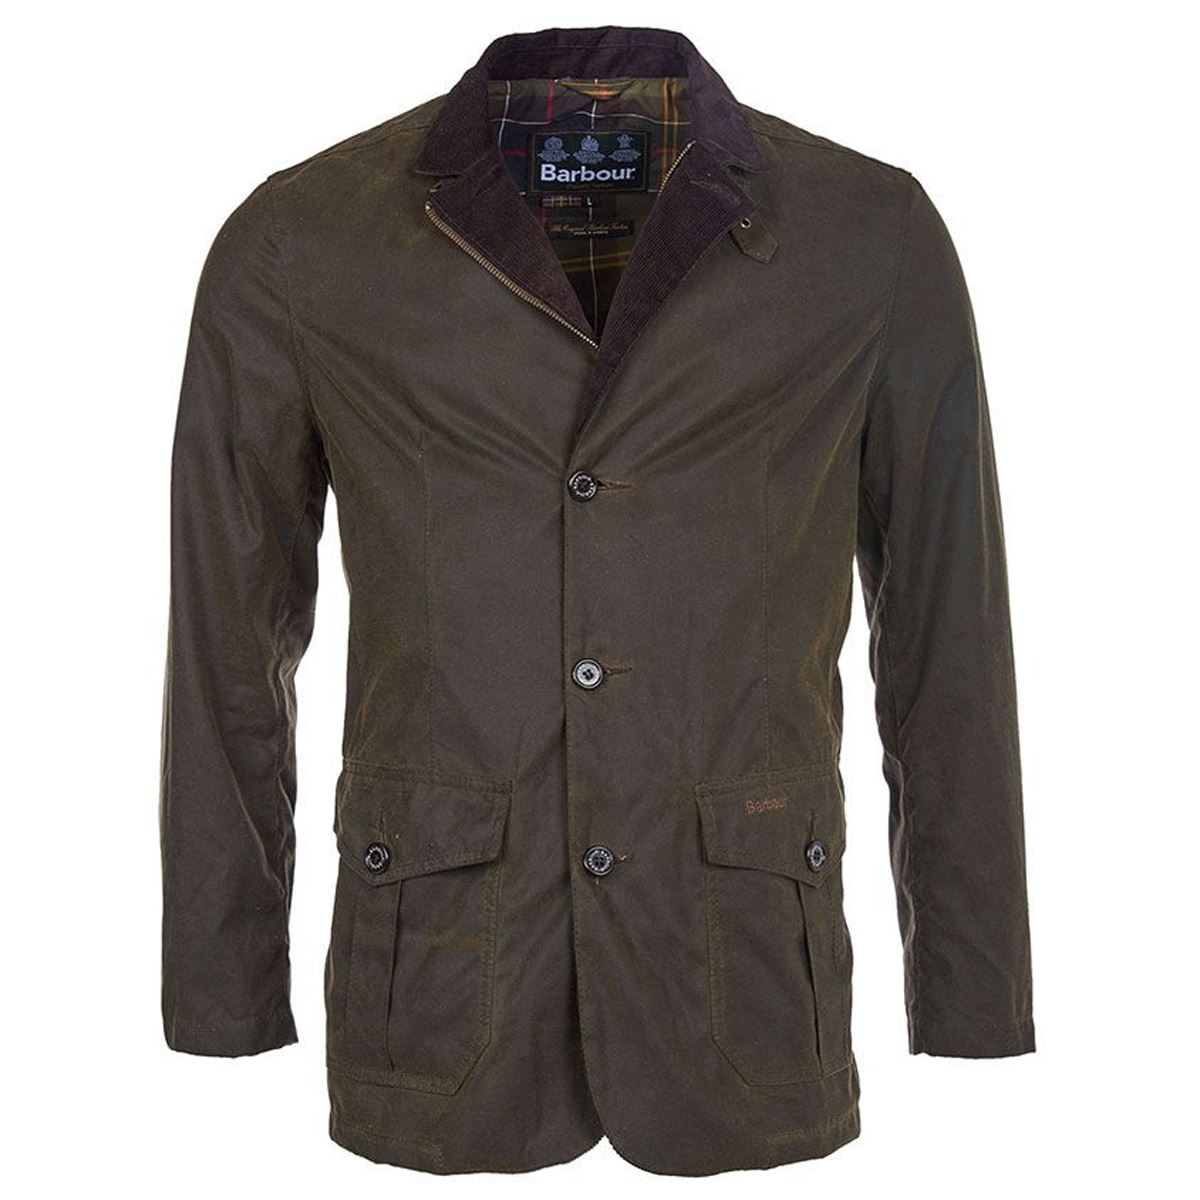 Do Barbour jackets run small?